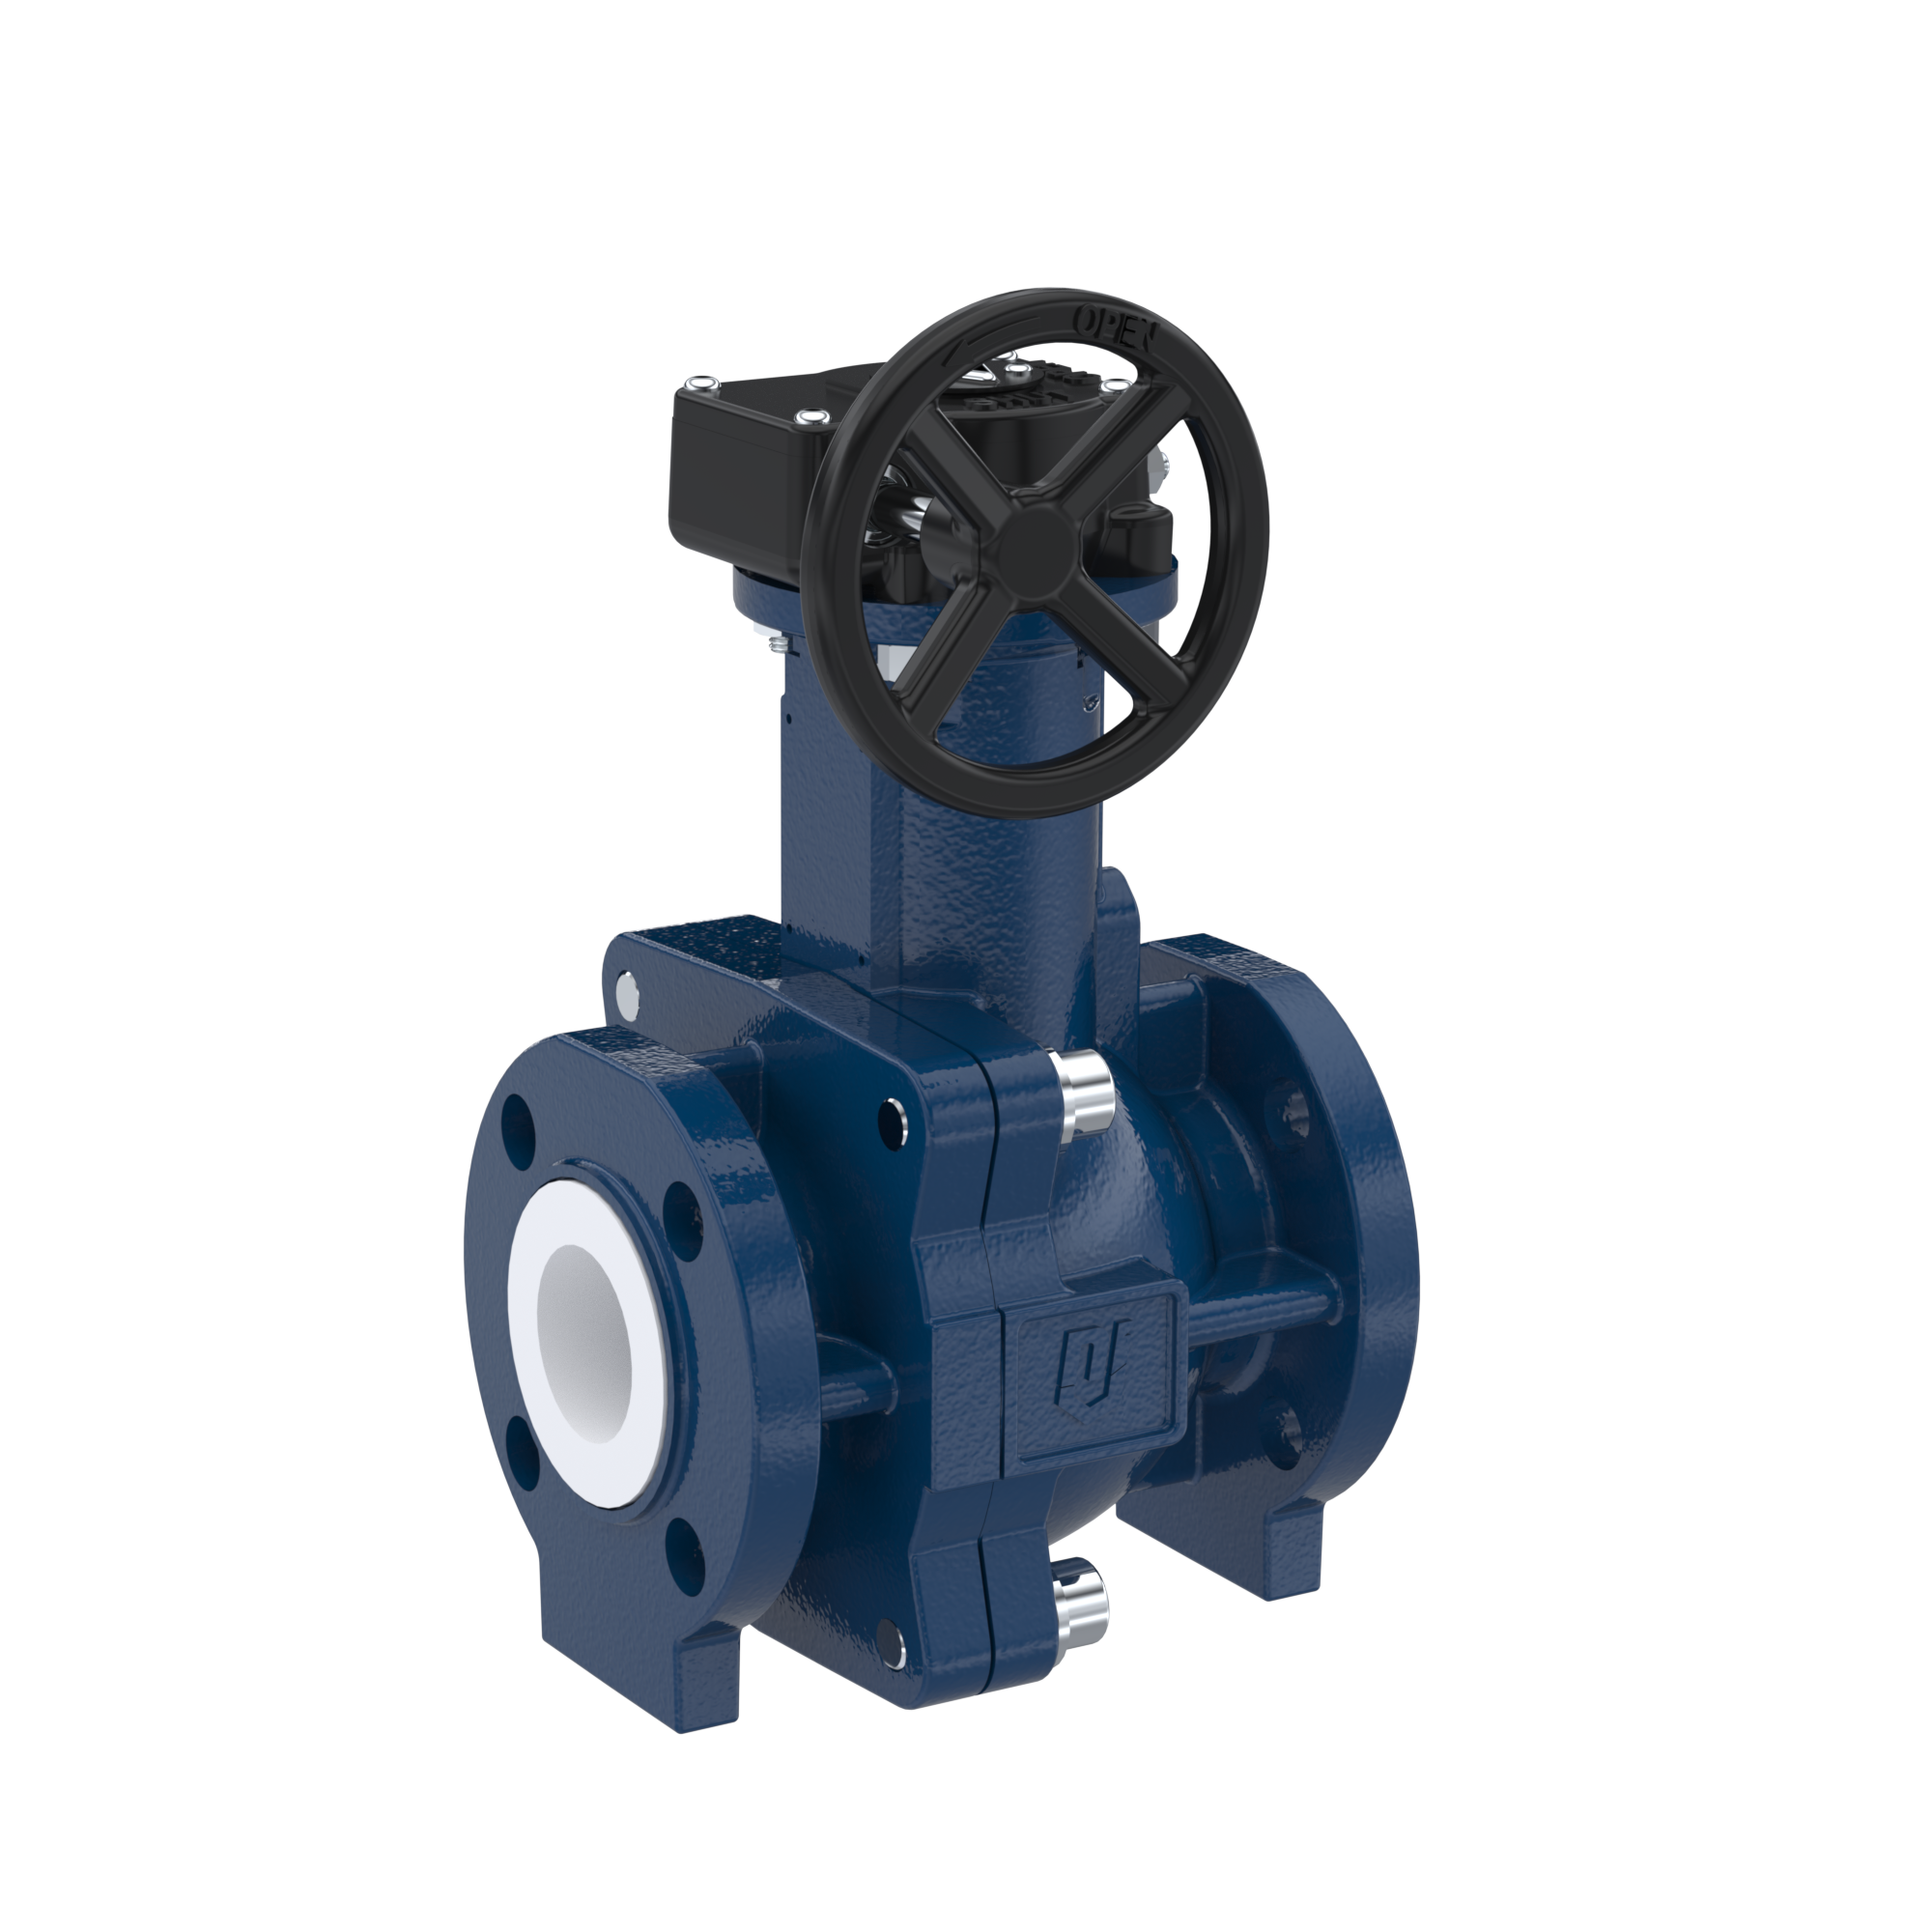 PFA-flange ball valve FK13 DN25 - 1" inch ANSI 150 made of spheroidal graphite cast iron with worm gear